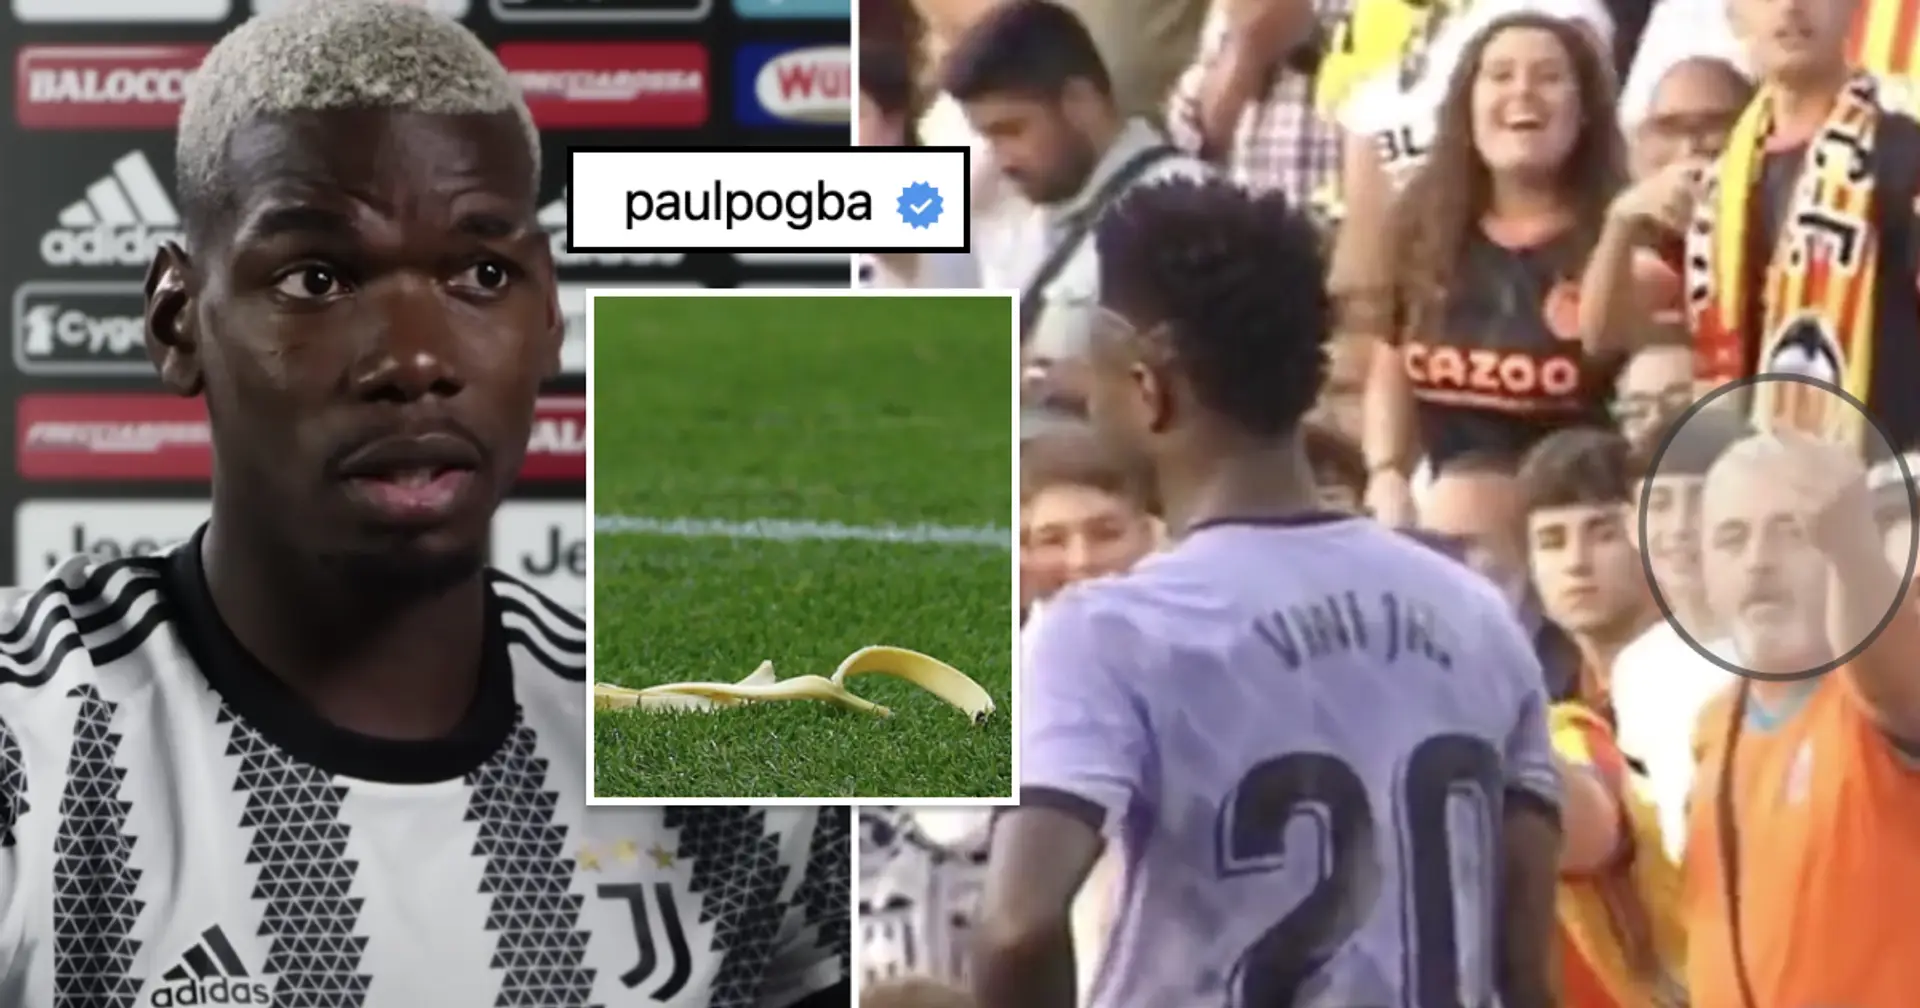 'Bananas, animal noises, songs against us? It's mental illness': Pogba supports Vinicius amid racism scandal in Spain